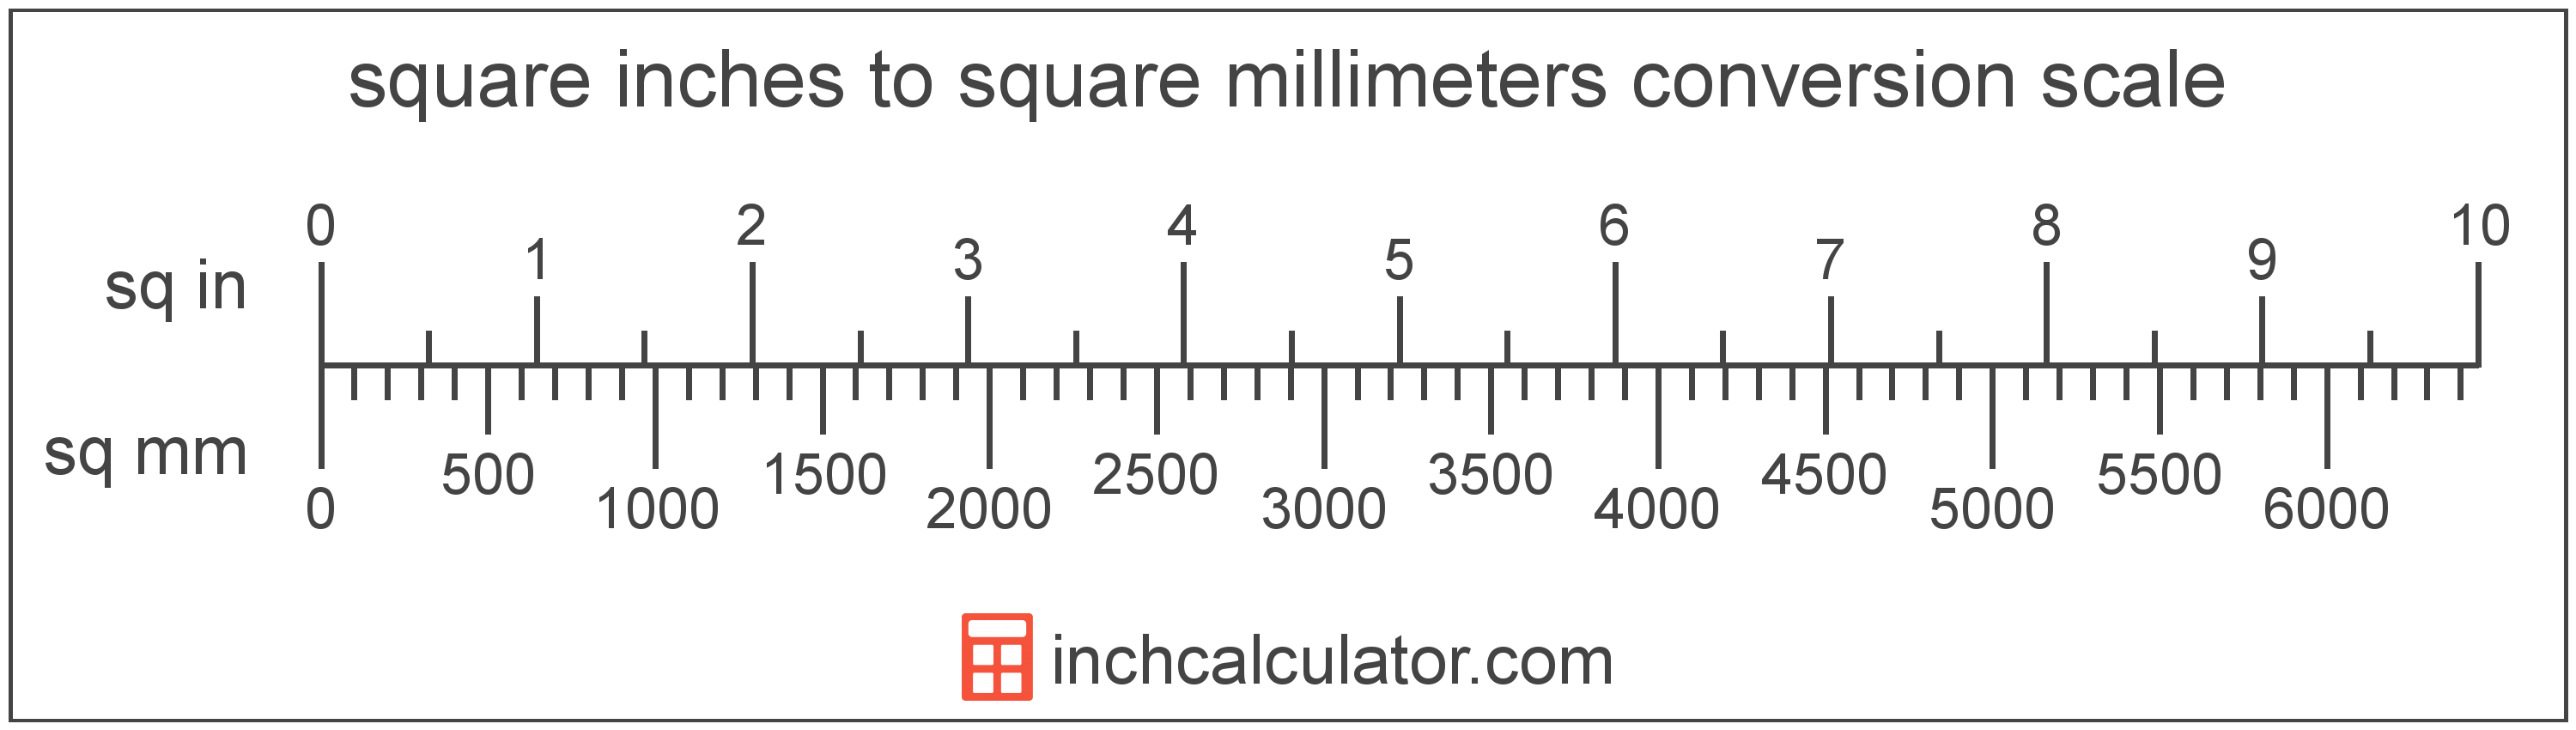 Square Millimeters to Square Inches Conversion (sq mm to sq in)